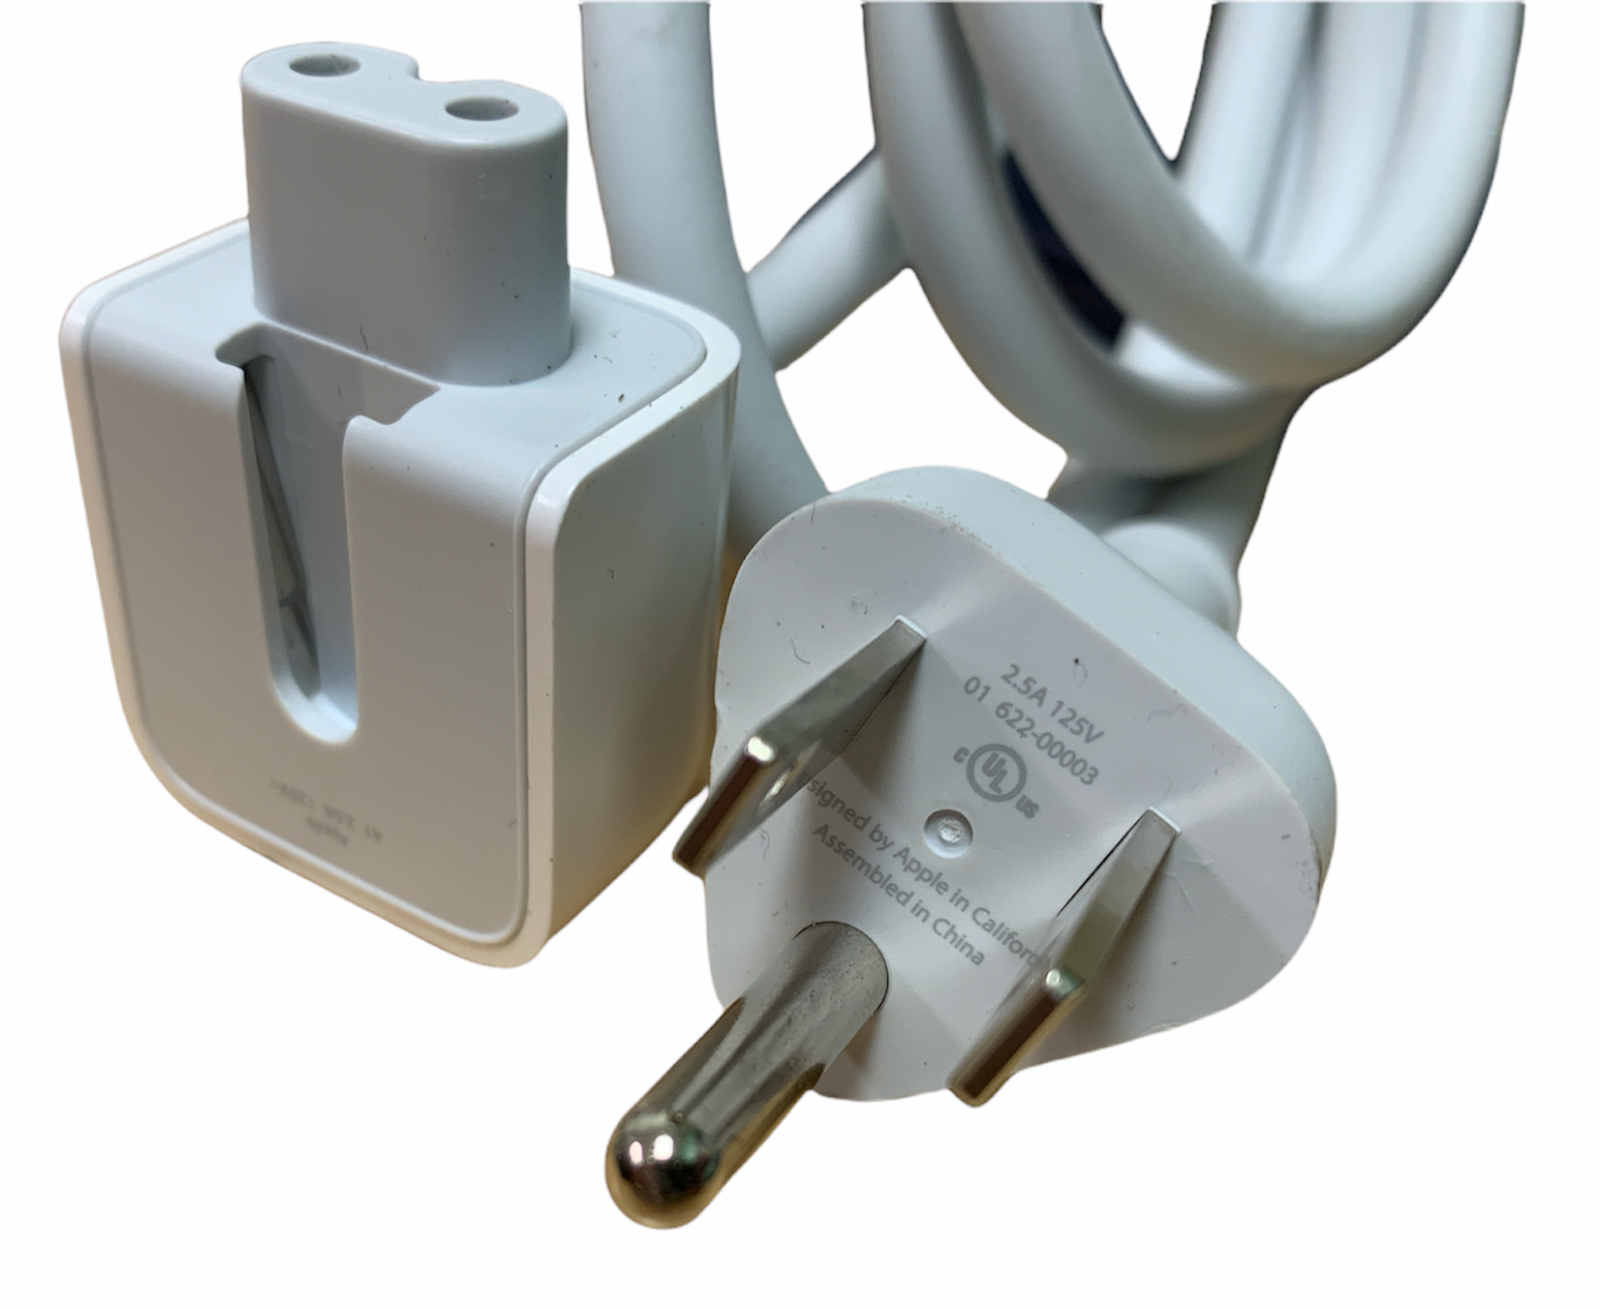 Apple Macbook Extension Cable Cord from Magsafe 1&2 - 45W, 60W, 85W